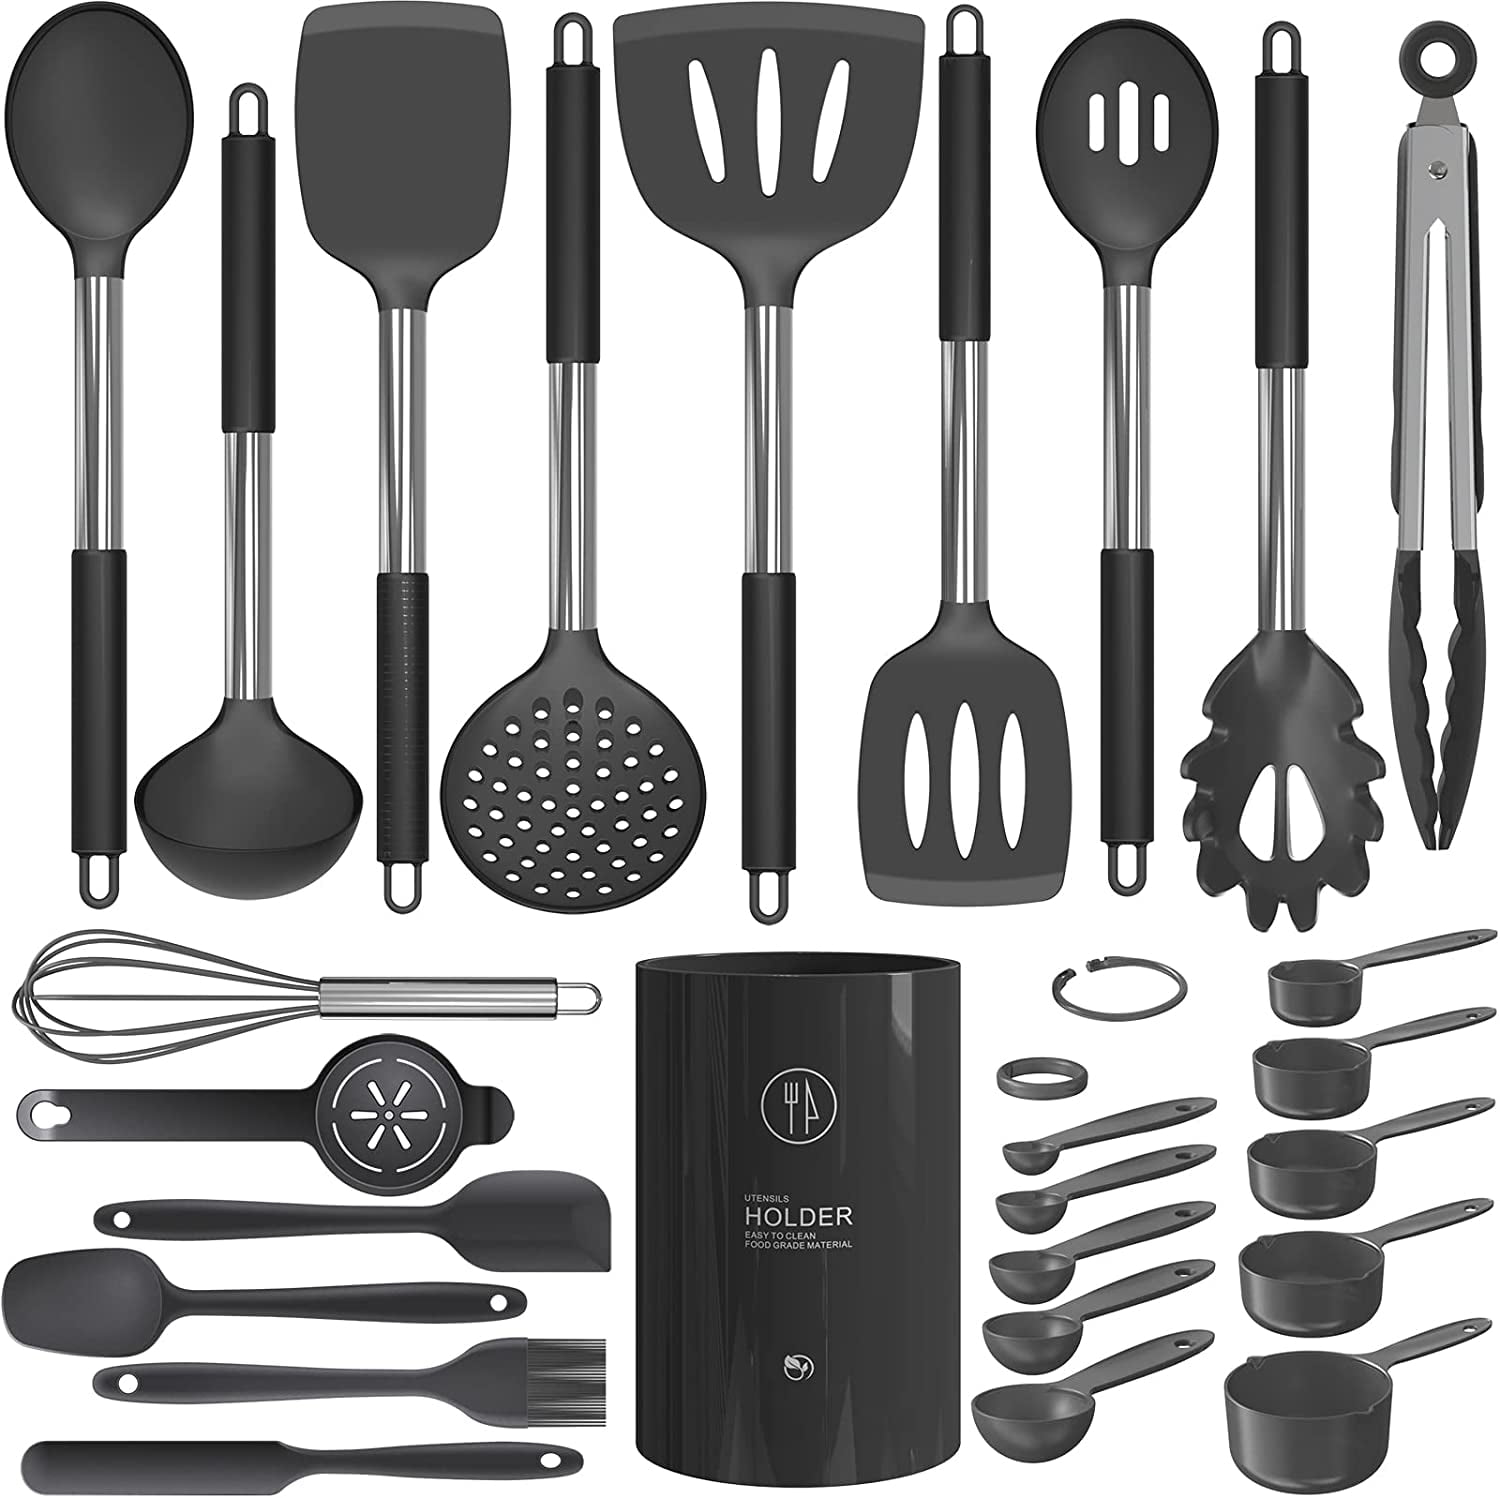 Kitchen Utensils Set 10pcs Silicone Non-stick Barreled Cooking Utensil All  Over Silica Gel Utensil With Gift S Shaped Hooks Black